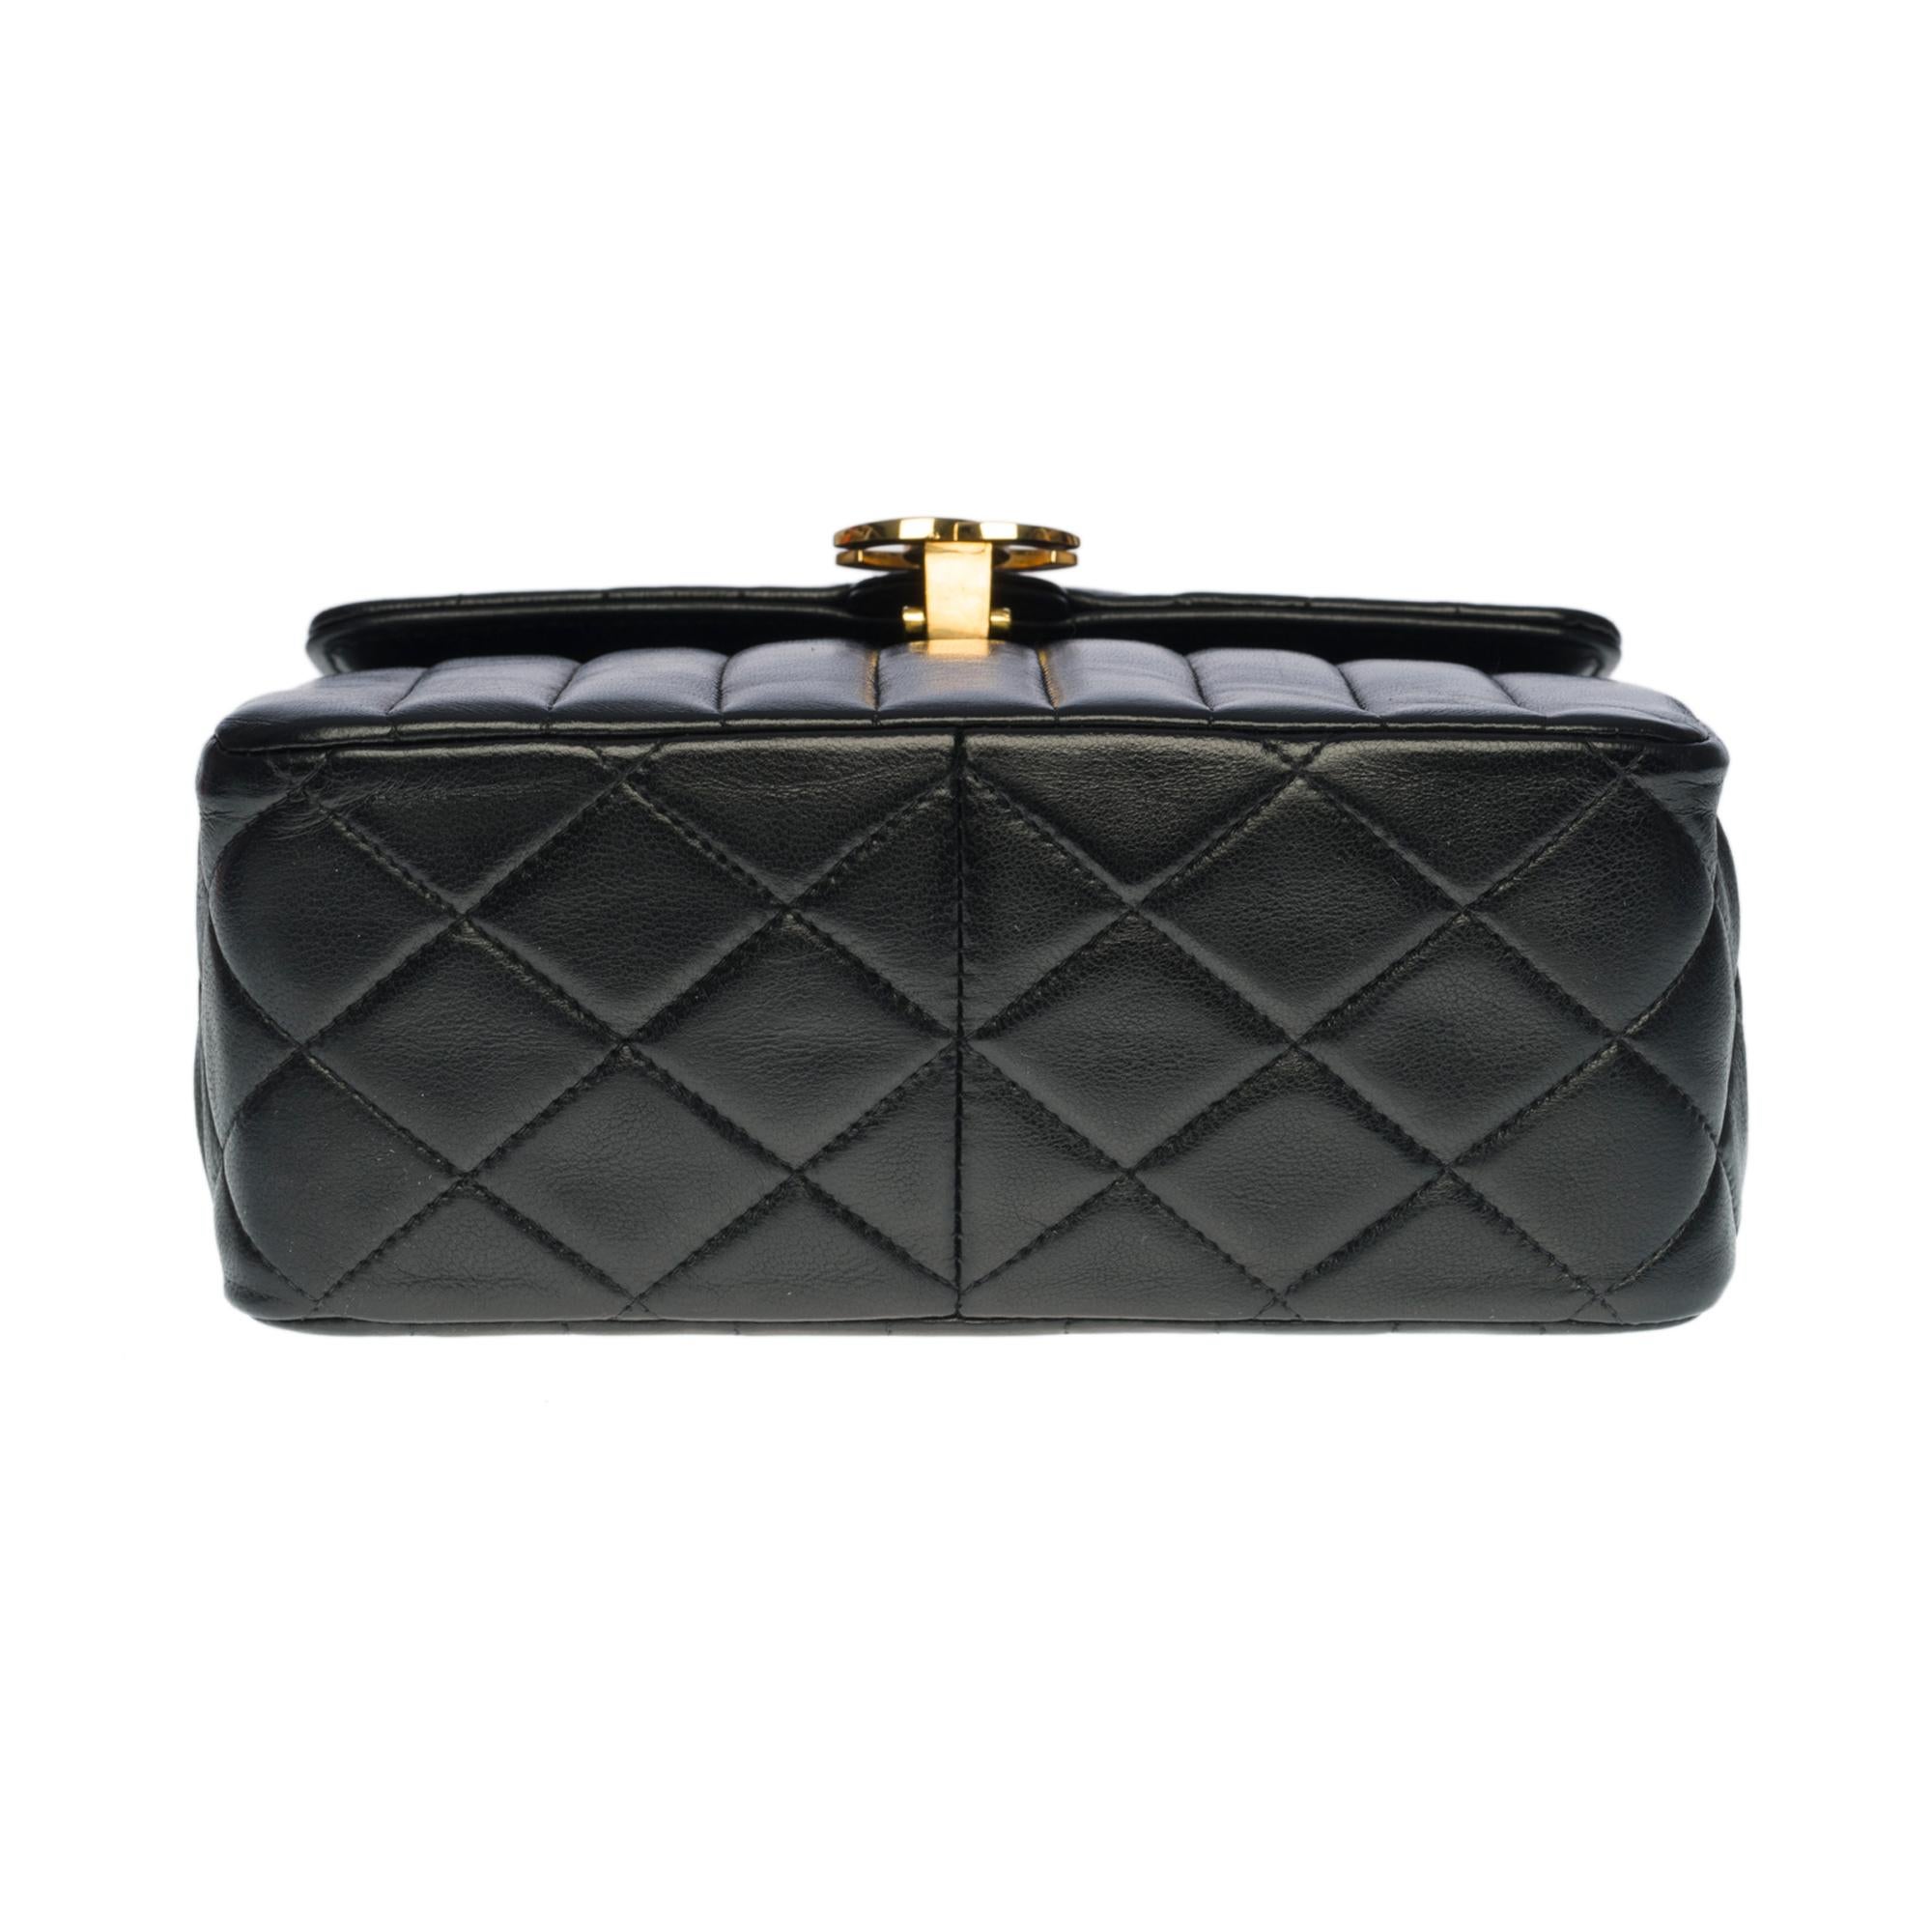 Rare vintage Mini Chanel Classic shoulder flap bag in black quilted lambskin, GHW 1